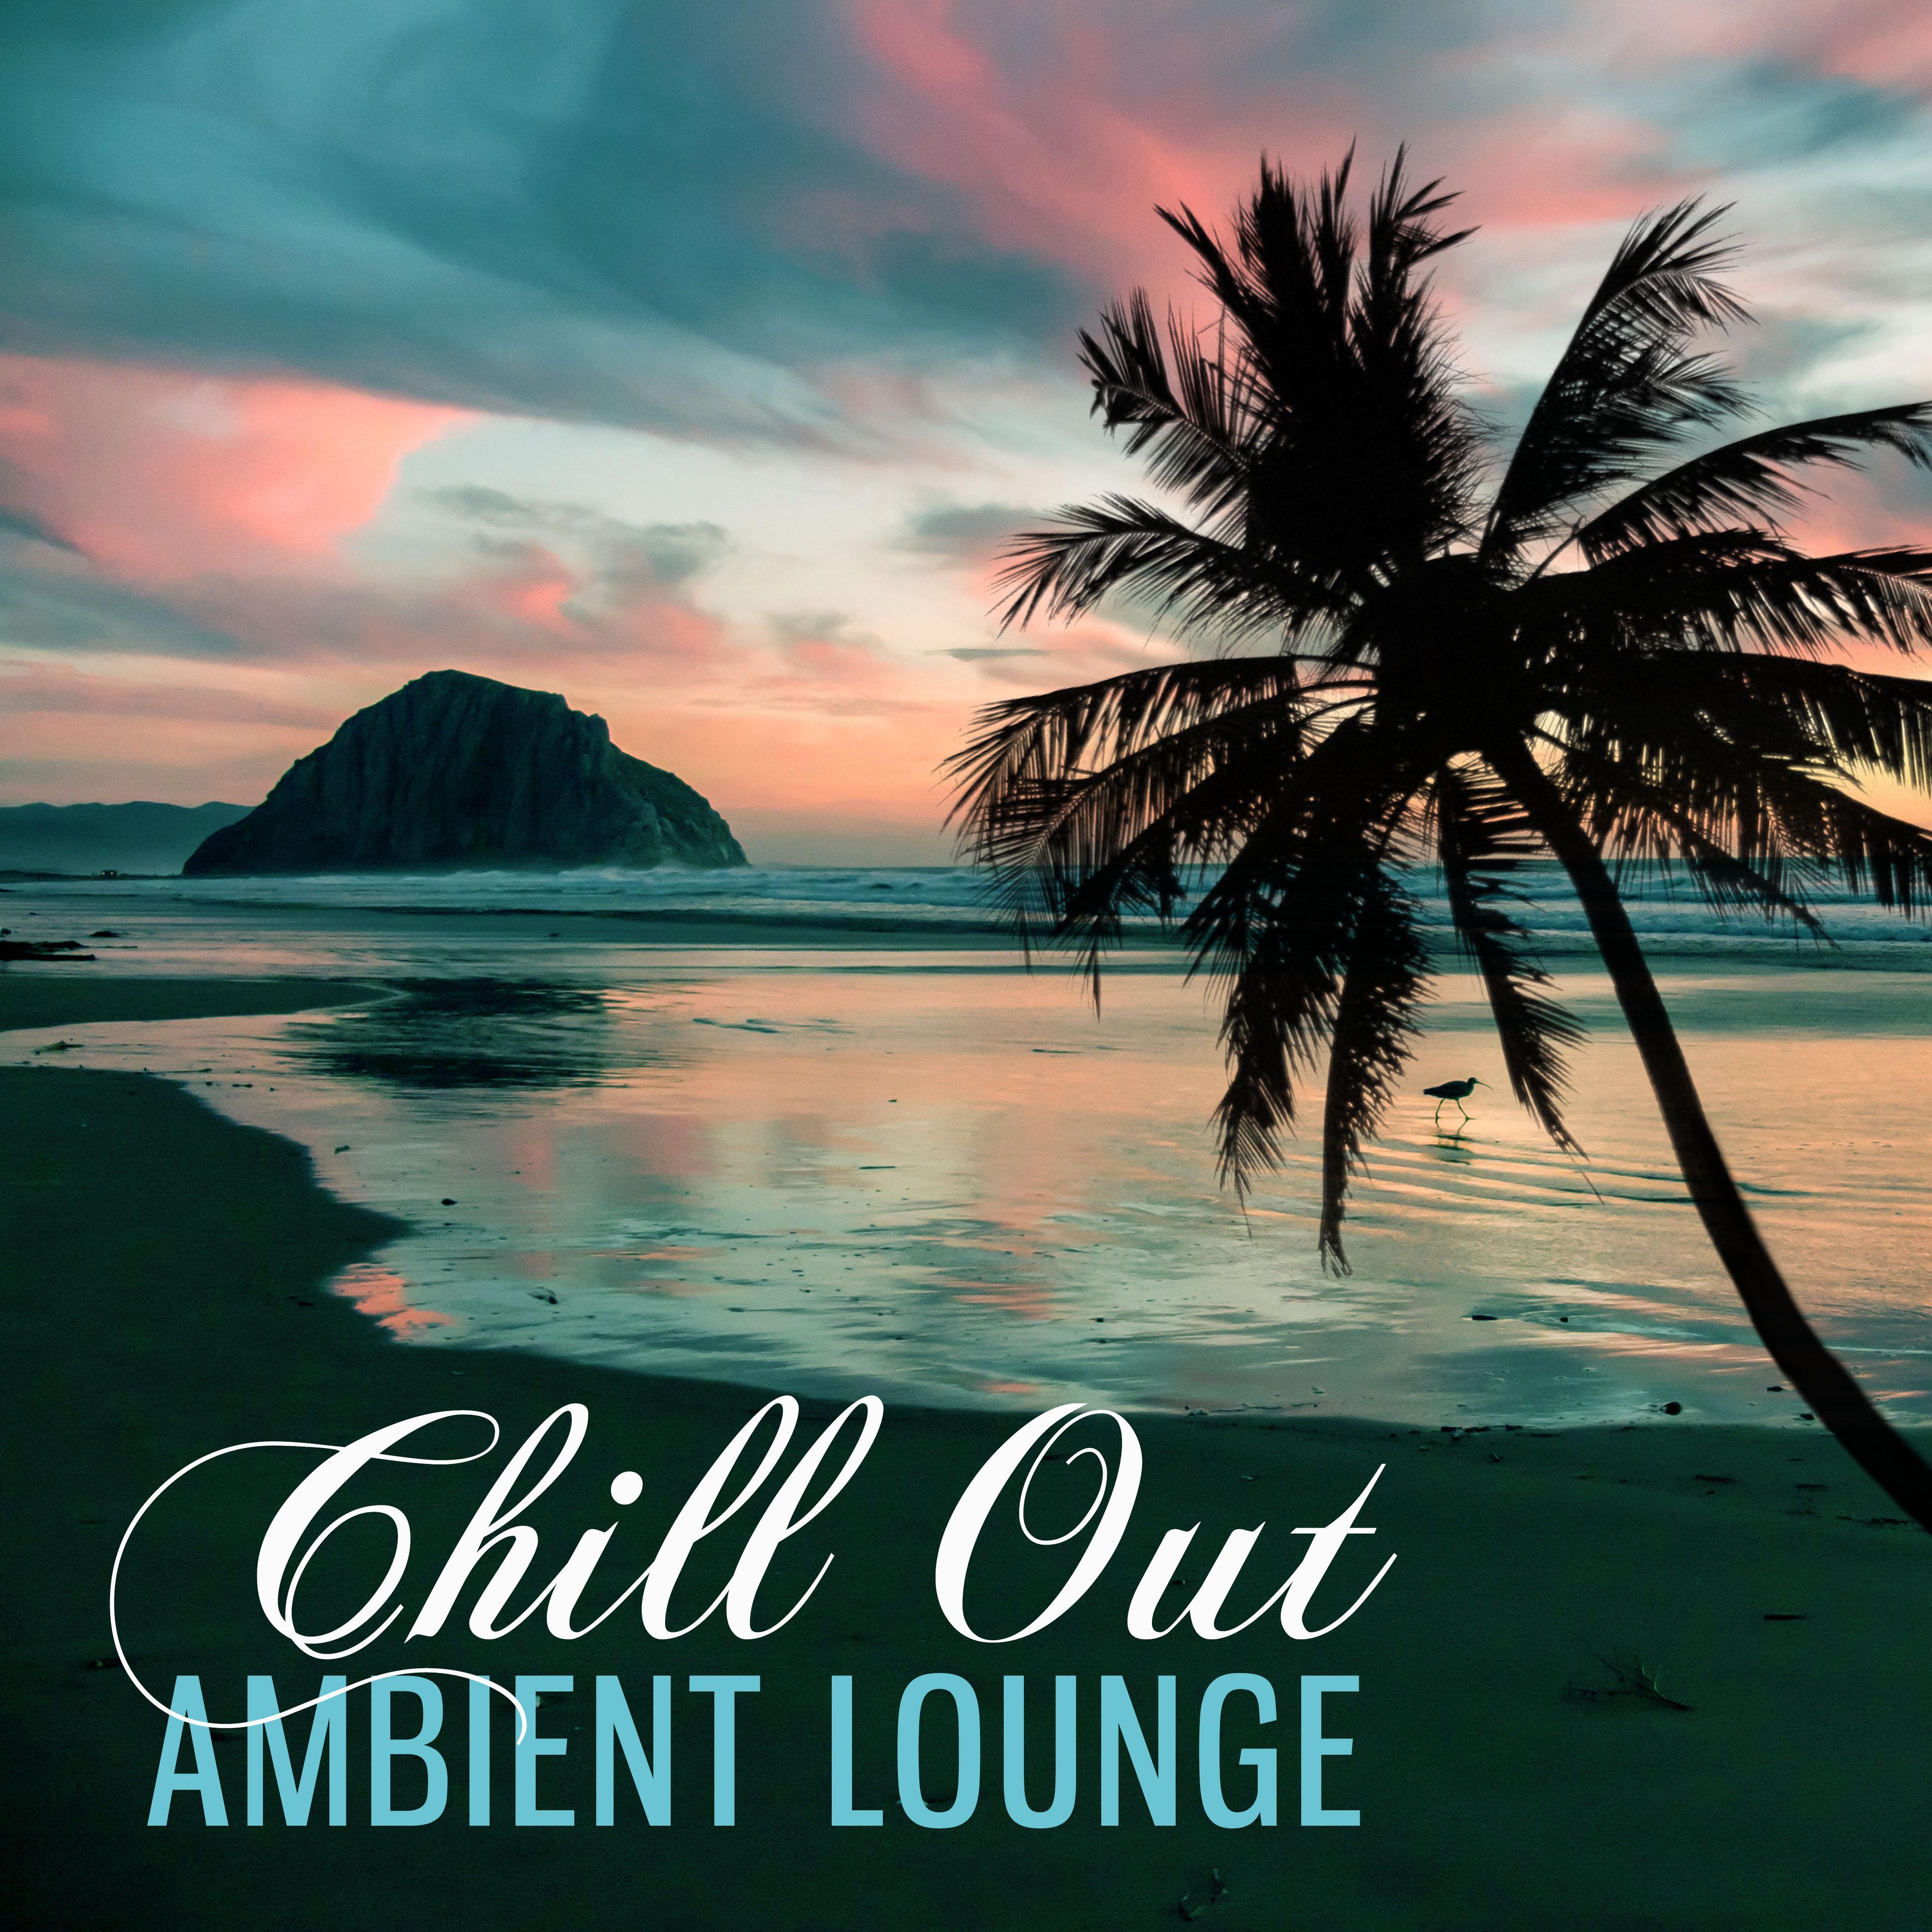 Chill Out Ambient Lounge – Calm Your Spirit, Chillout Music to Rest, Soft Sounds for Relaxation, Sweet Chill Music